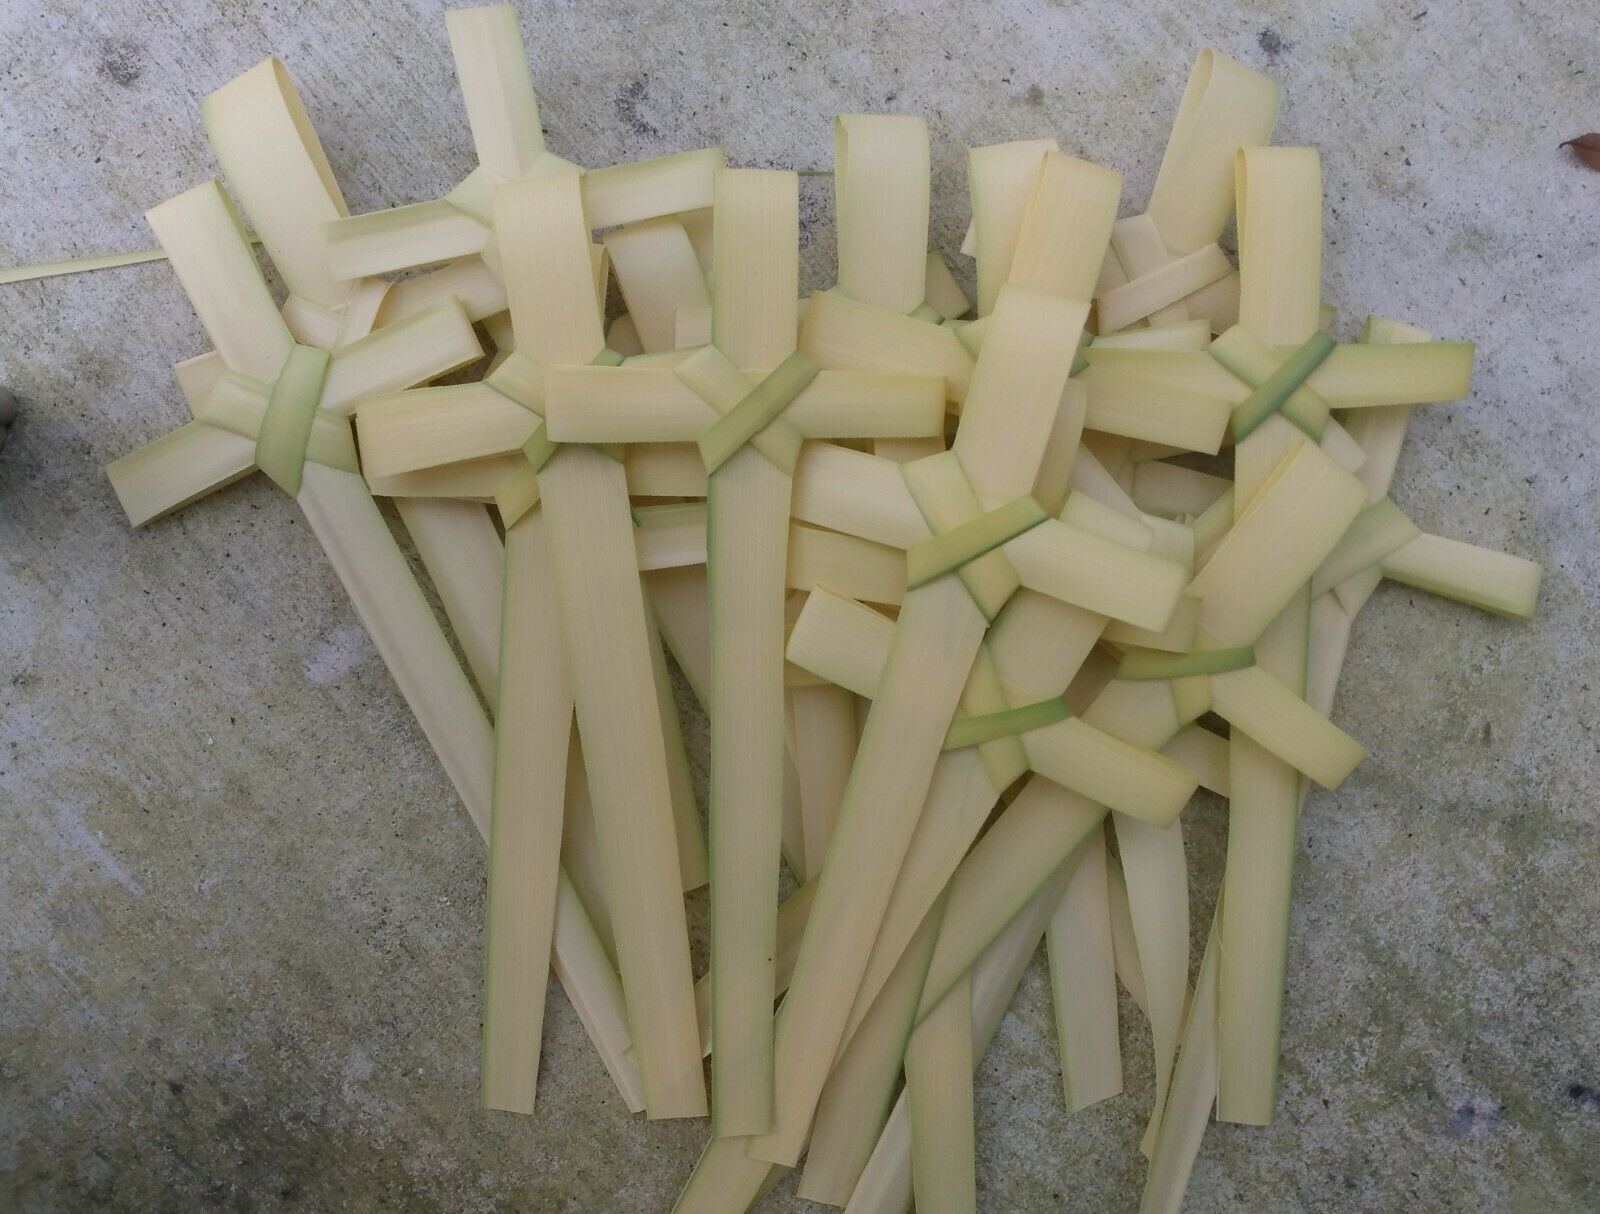 DON'T WAIT ORDER NOW  100 sm FRESH Palm Bud Crosses MADE IN FLORIDA  3day ship